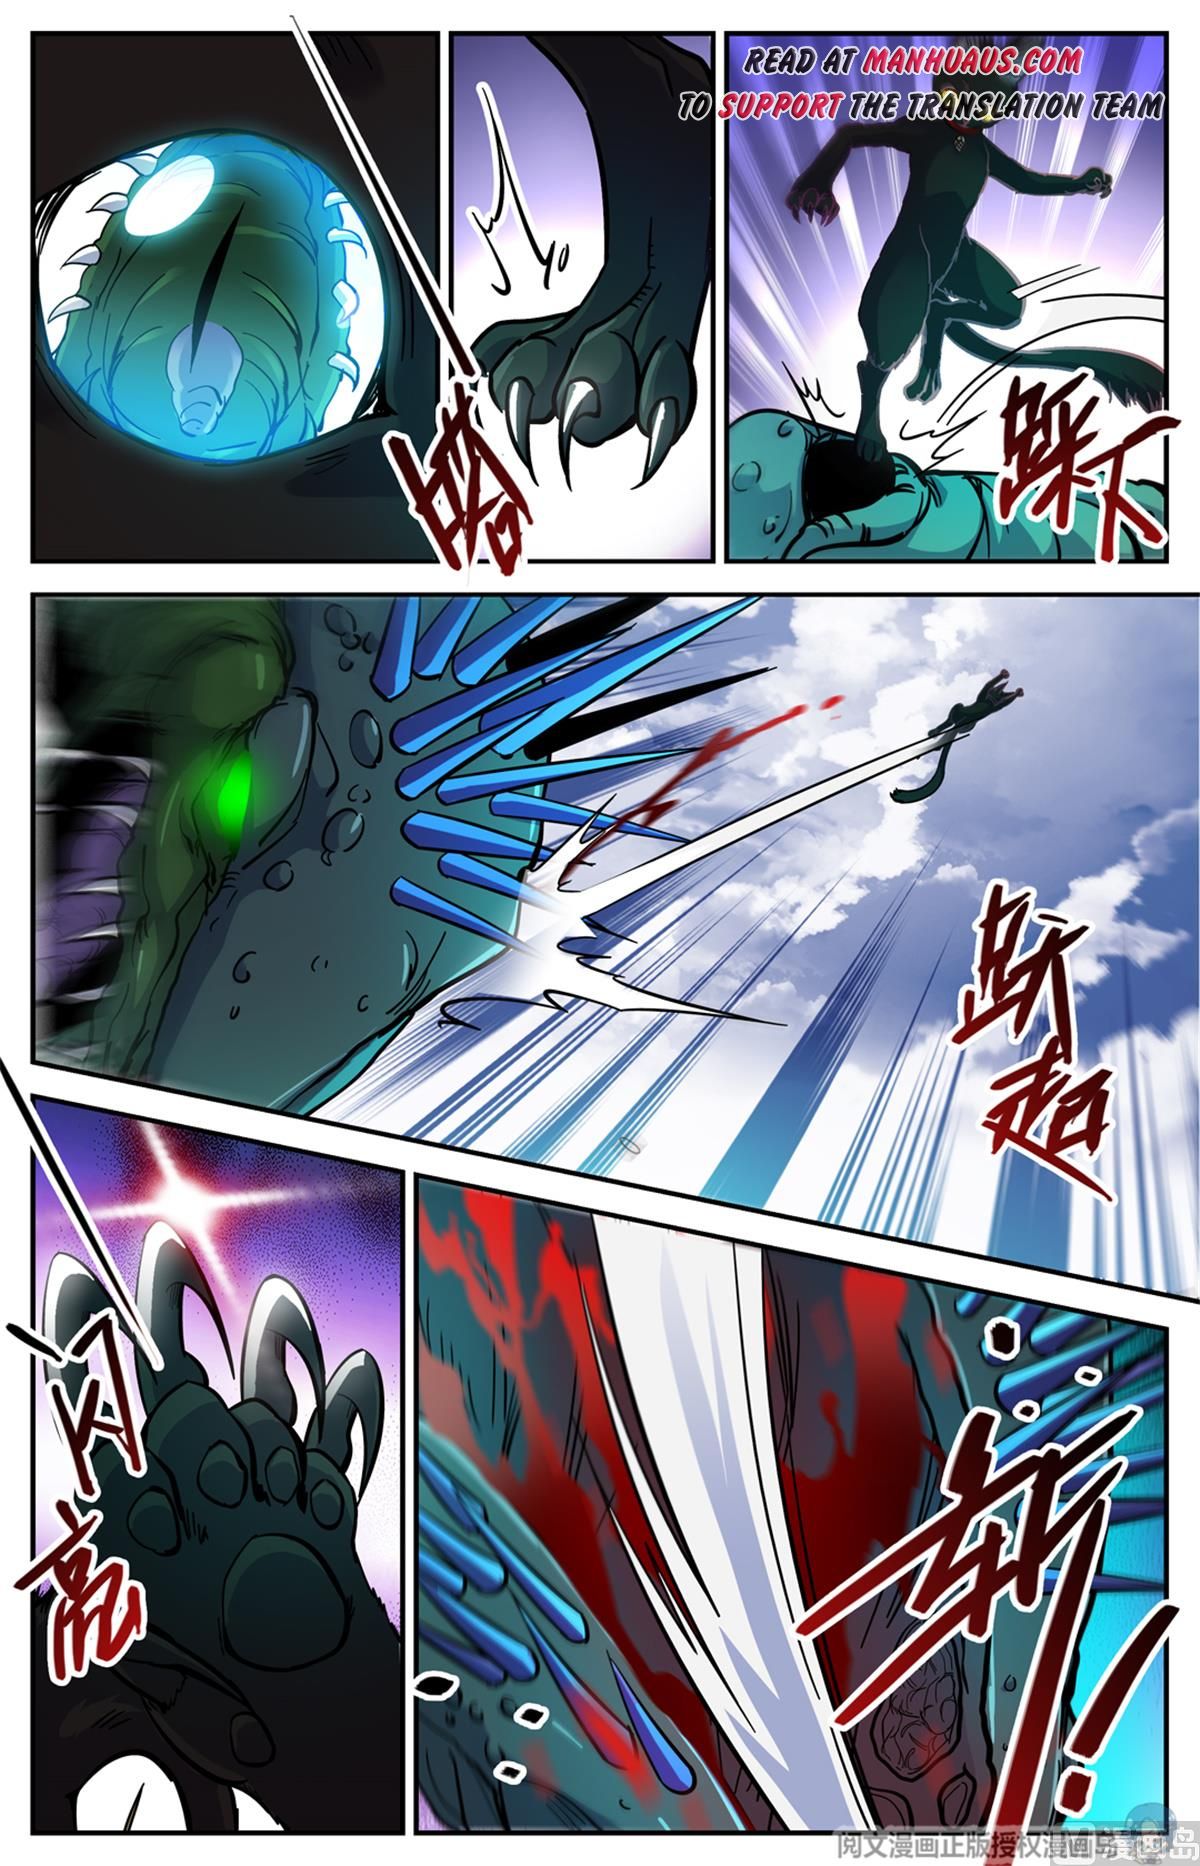 Versatile Mage chapter 520 page 7